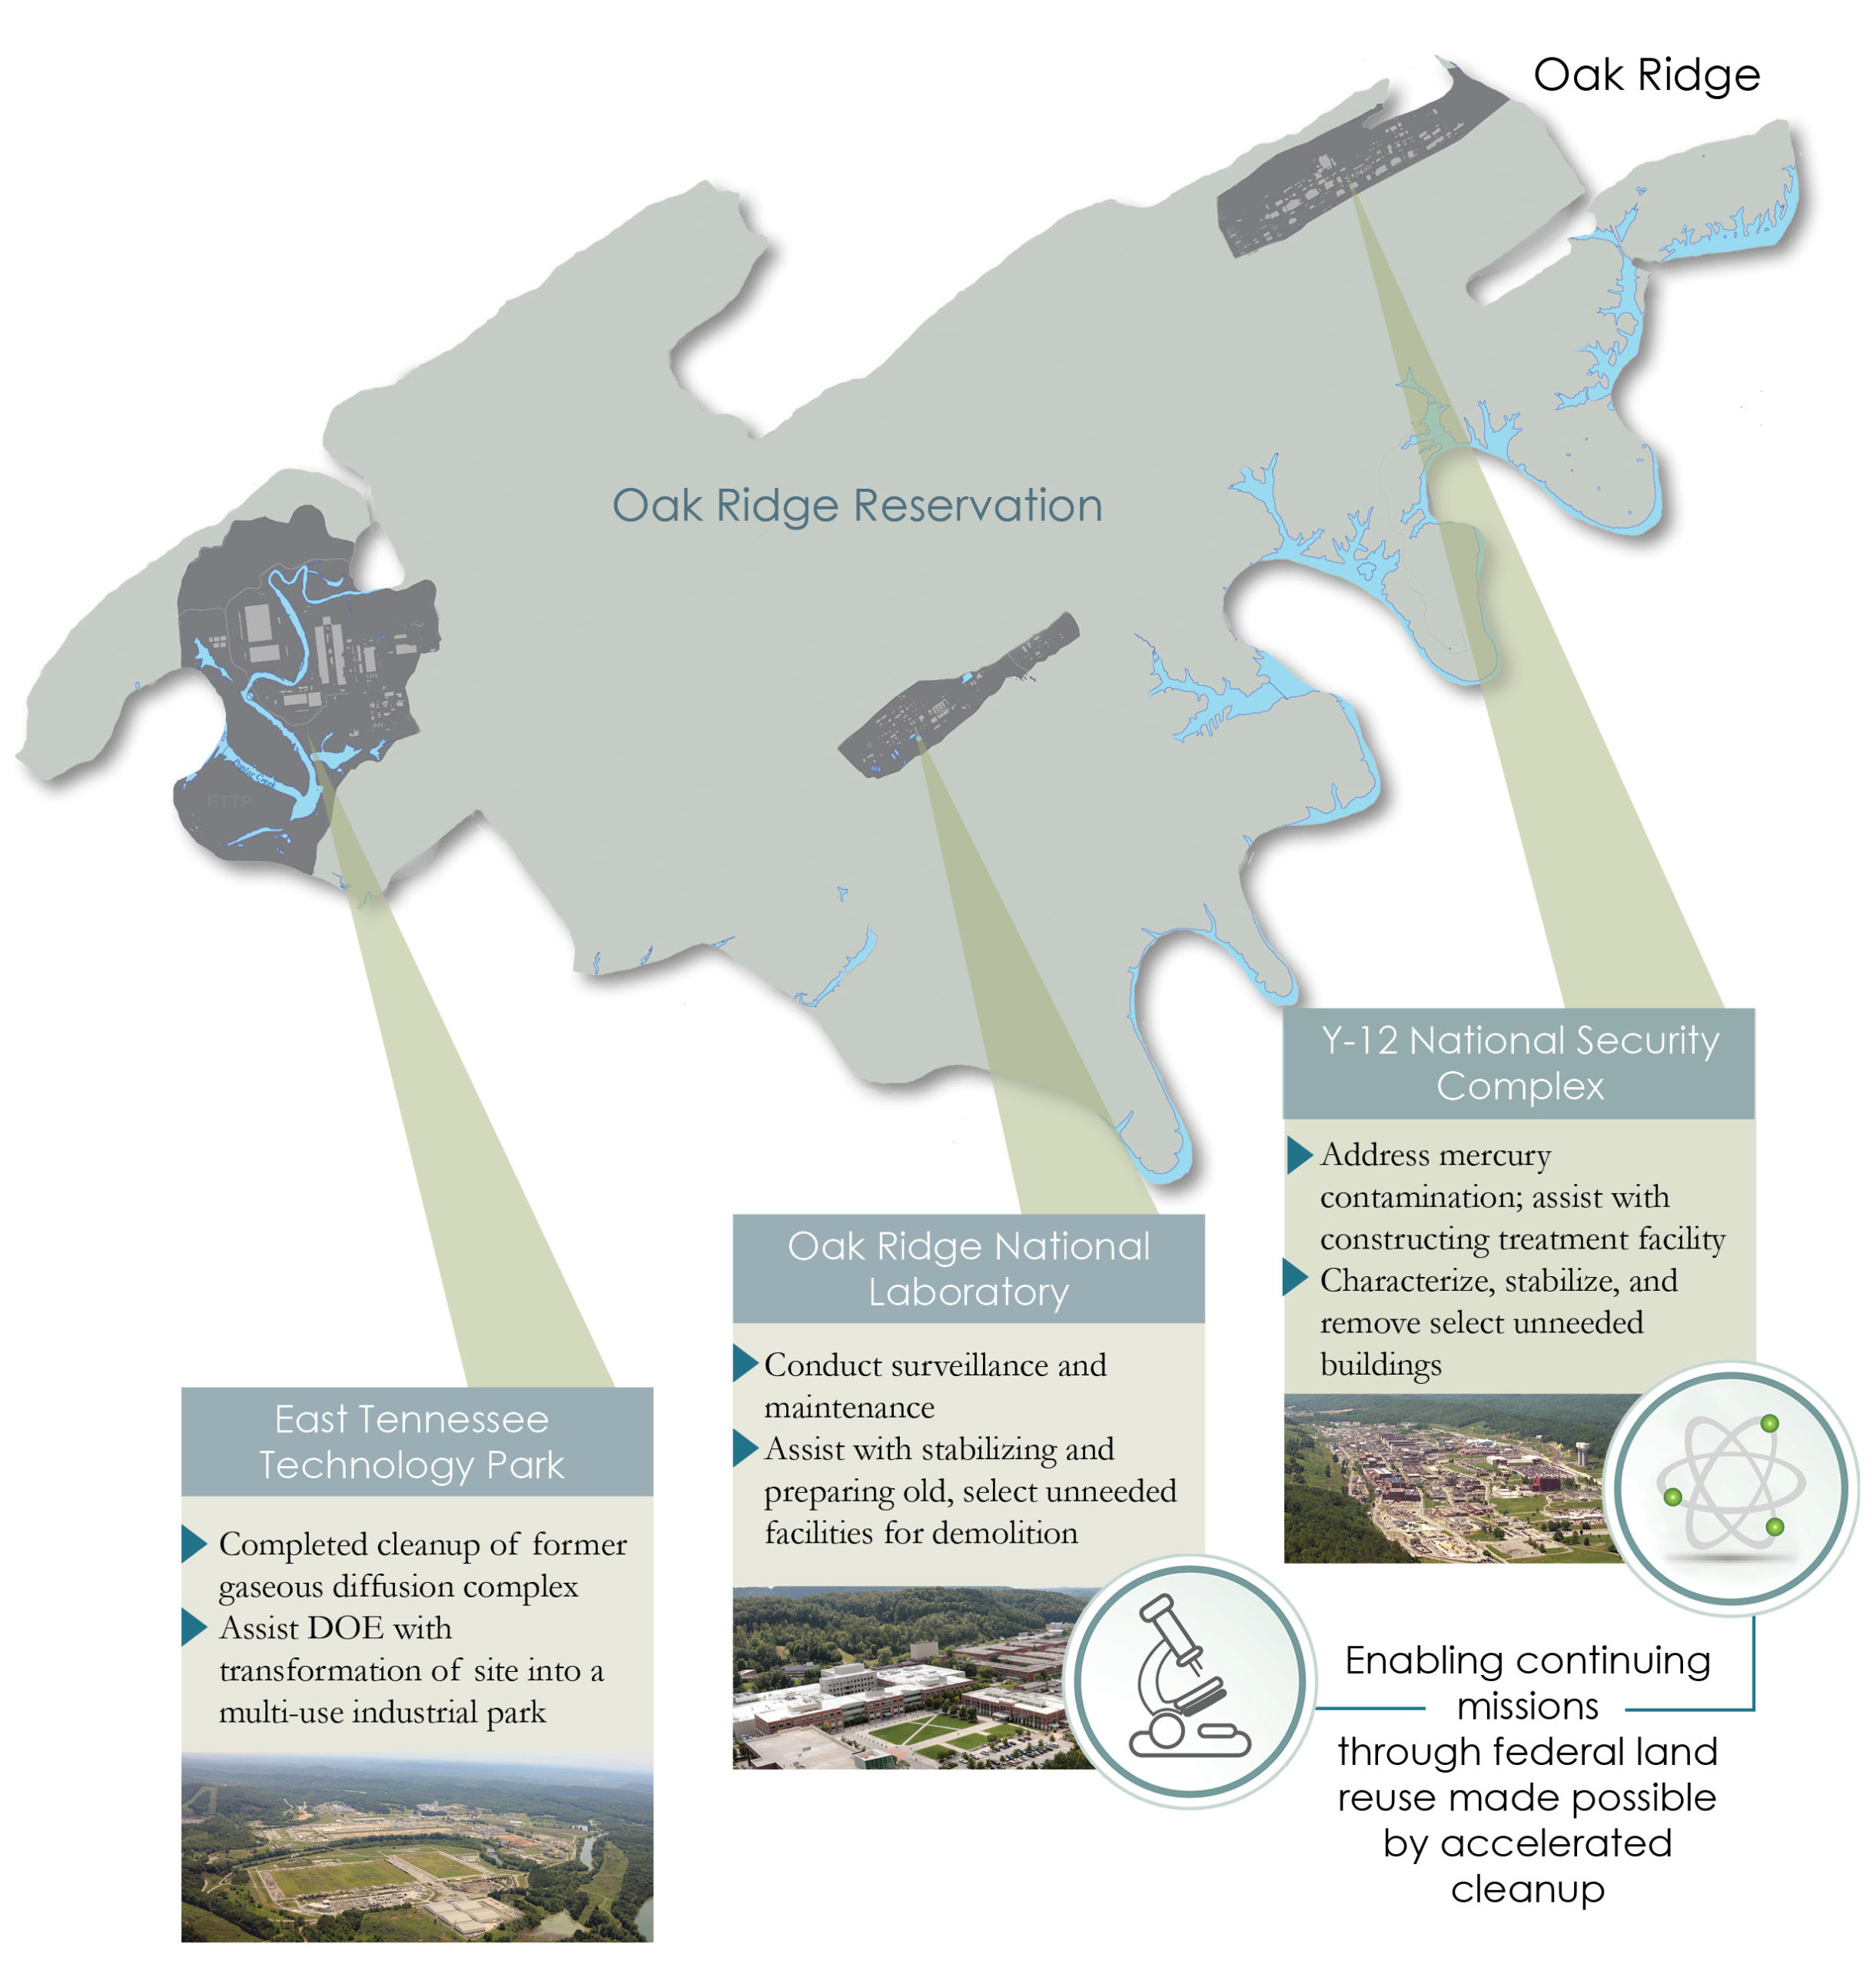 Graphic: Map annotating regulatory requirements for Oak Ridge Reservation